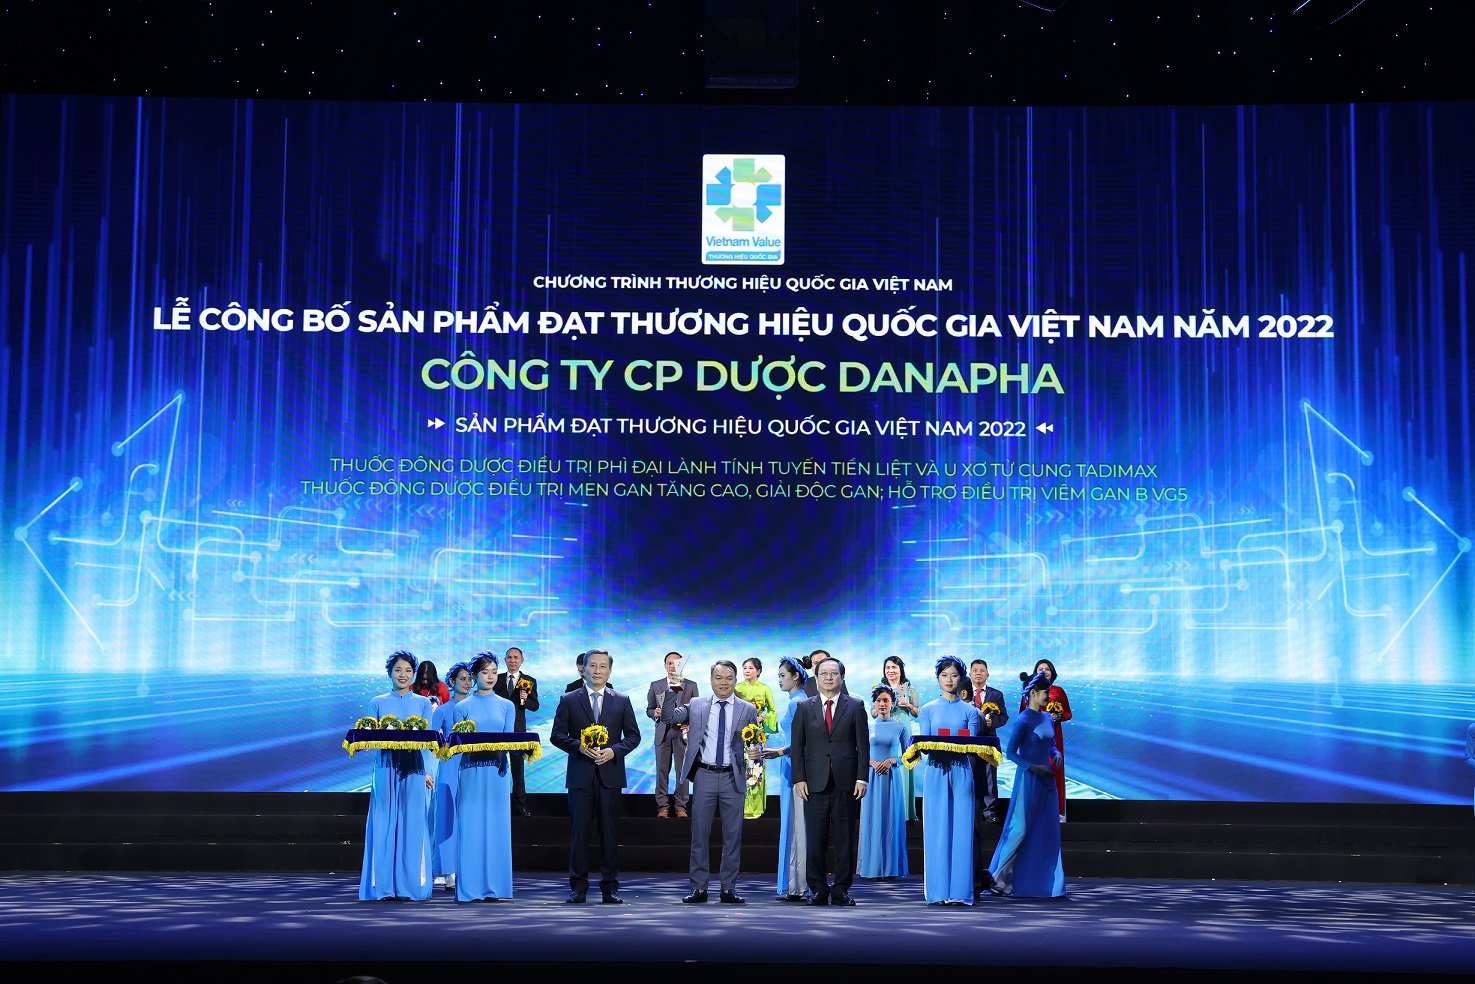 DANAPHA IS HONORED TO RECEIVE THE FOURTH CONSECUTIVE VIETNAM VALUE 2022